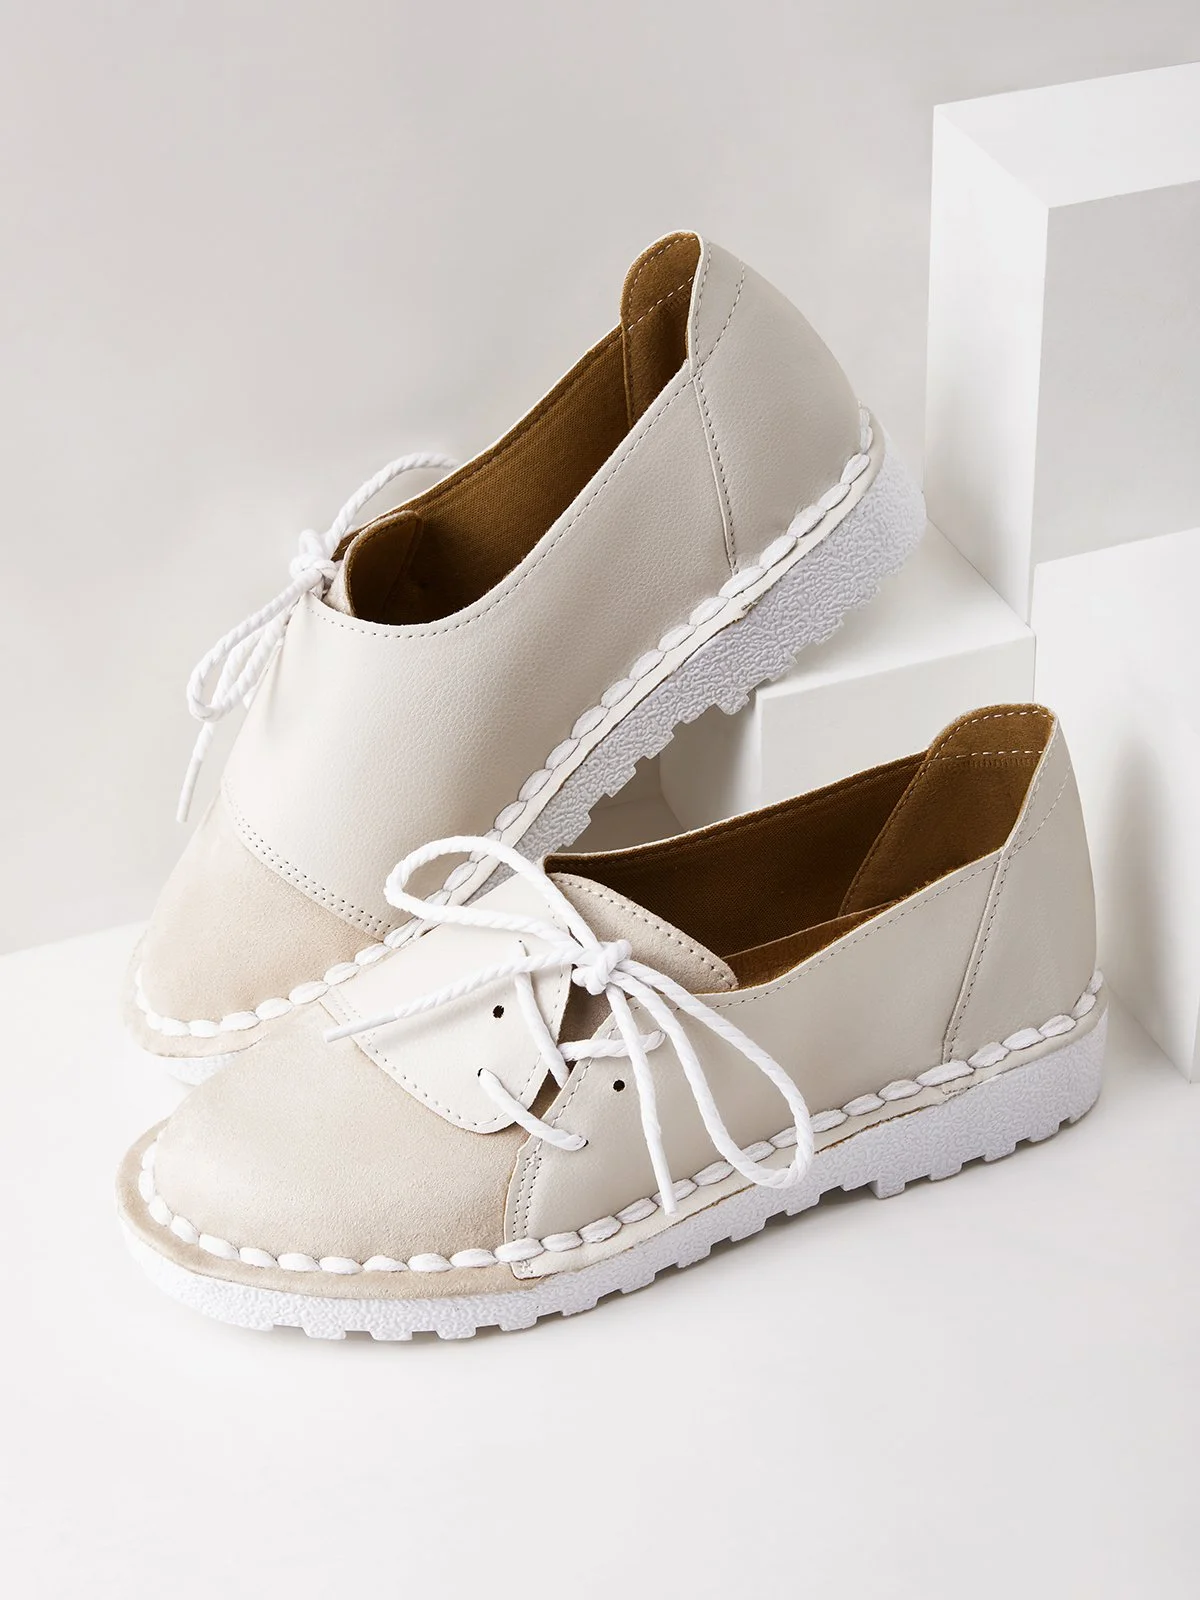 Women S Casual Vintage Round Toe Flats All Season Shoes Noracora